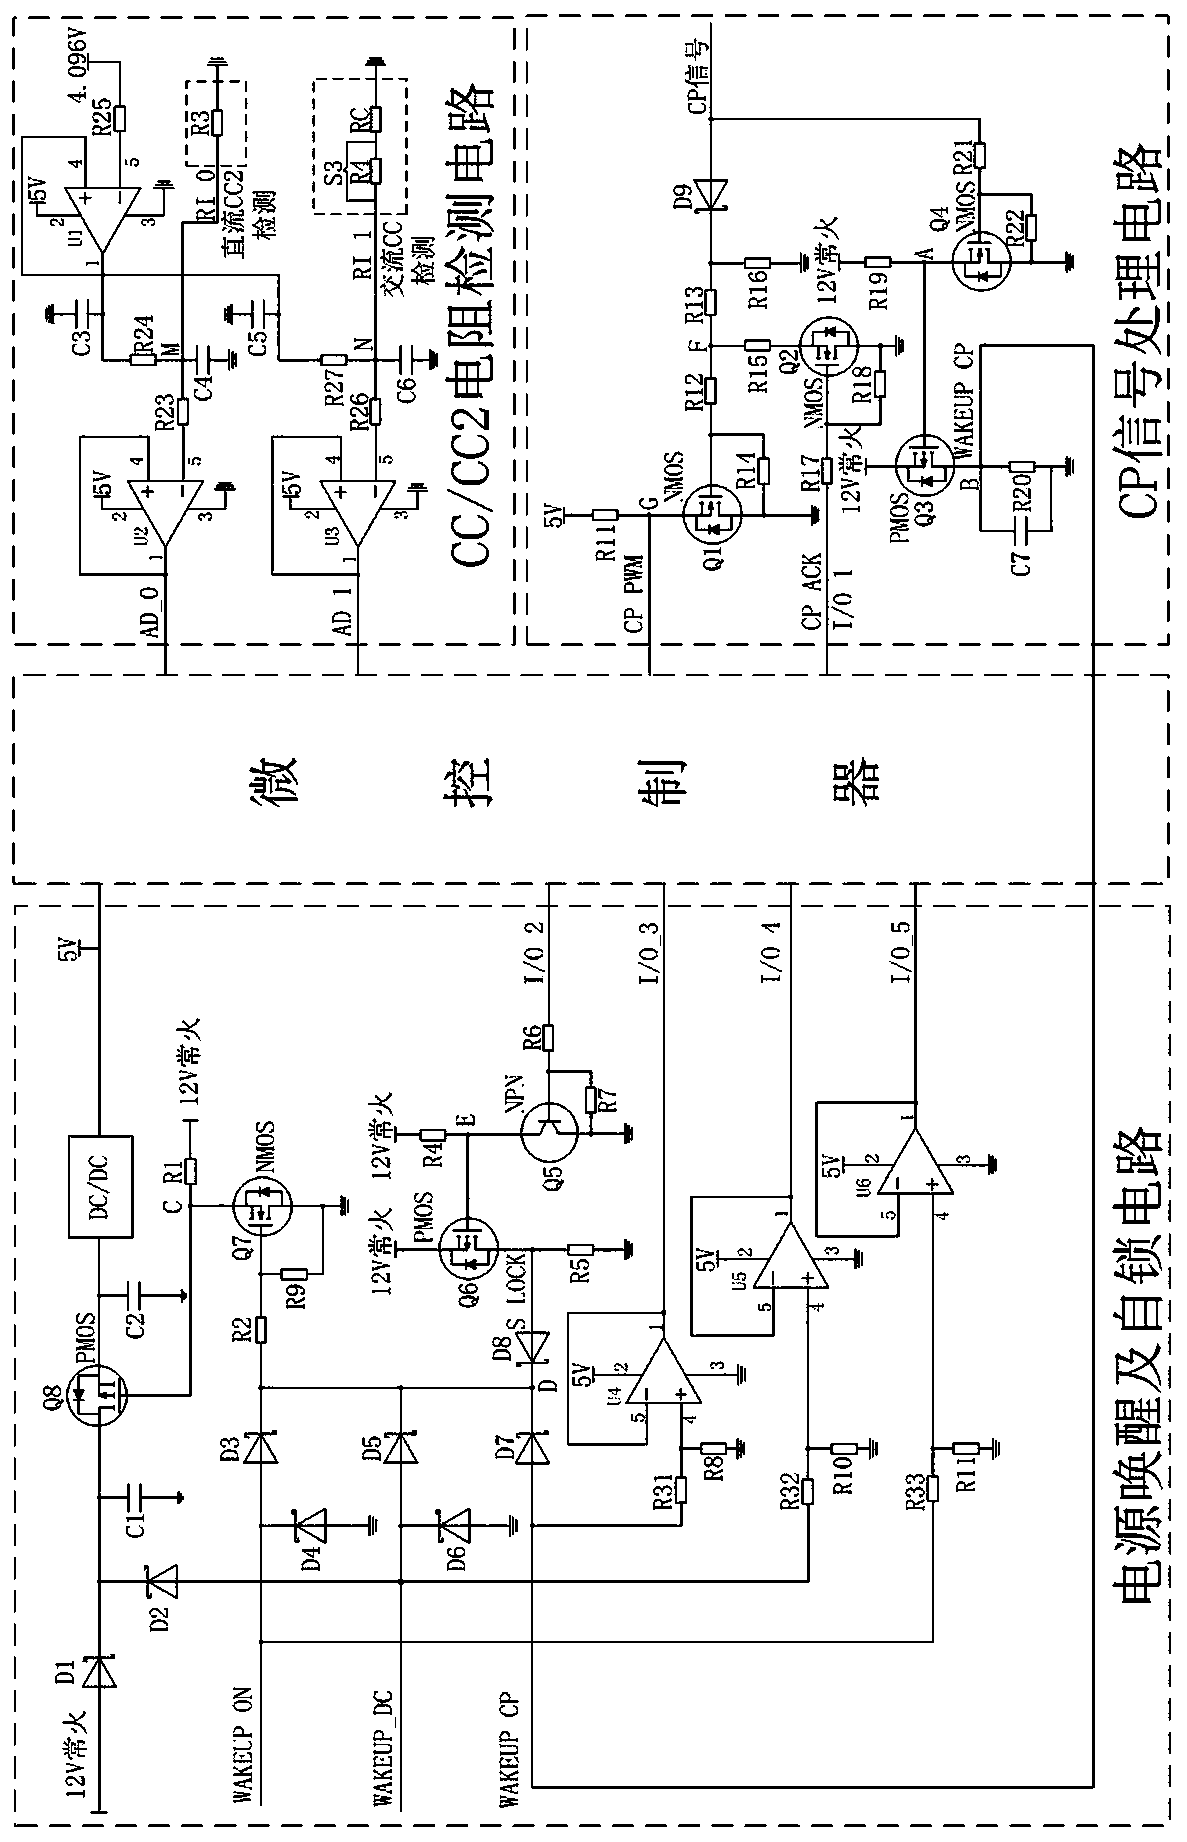 Alternating current/direct current charging control guiding circuit of electric vehicle conduction charging system and control method of circuit